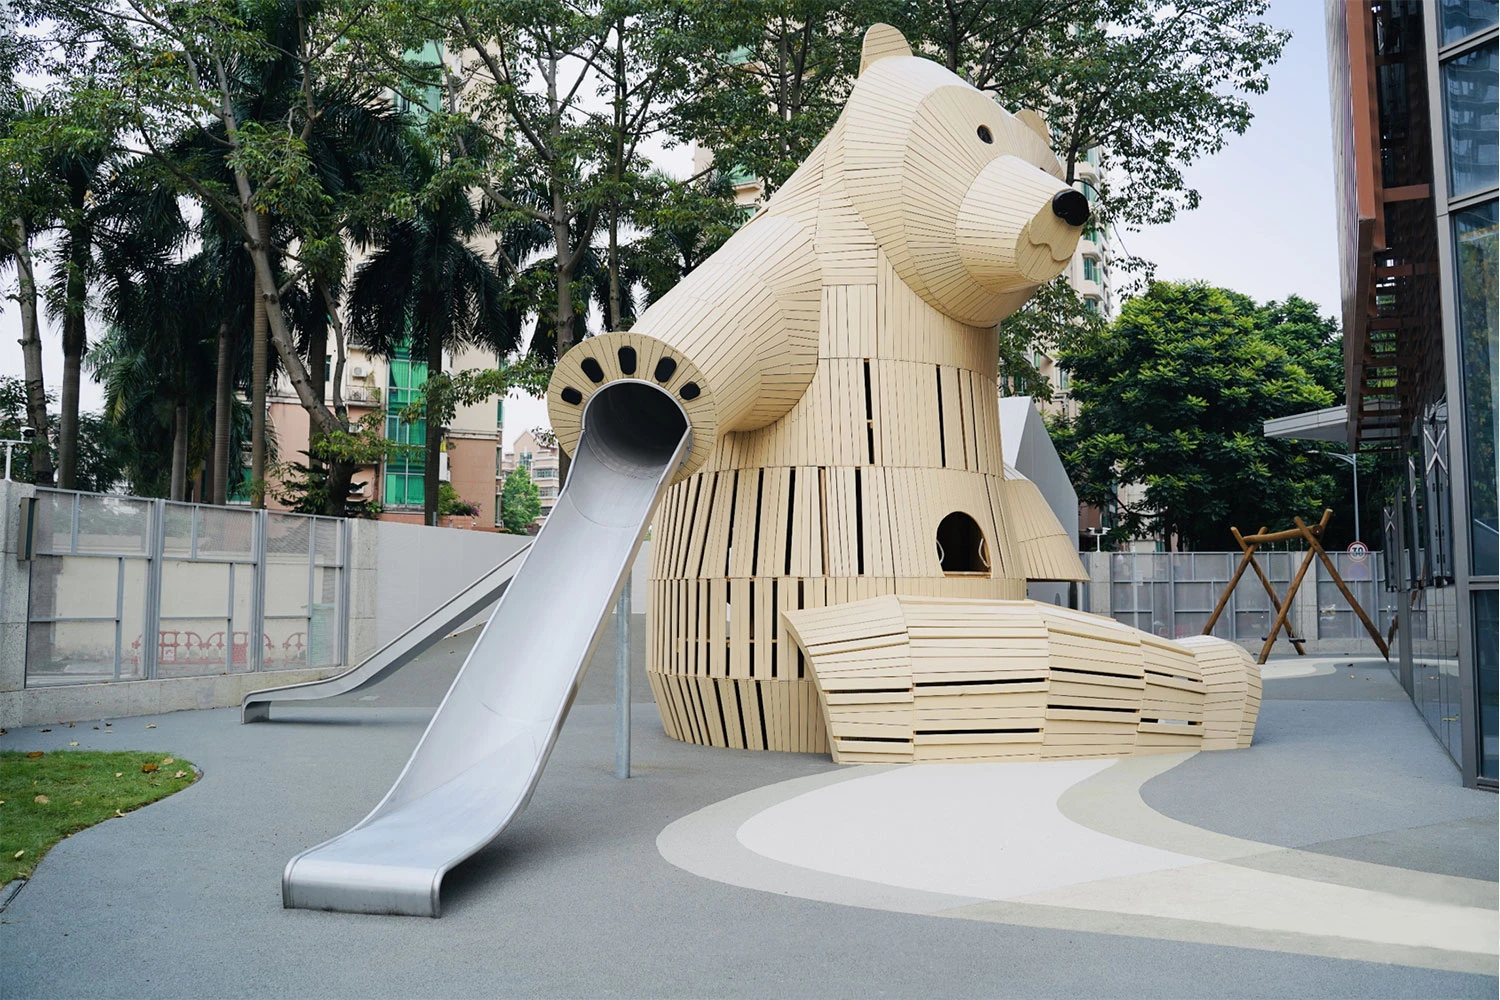 wooden playground sculpture looking like a big bear in kindergarten in China